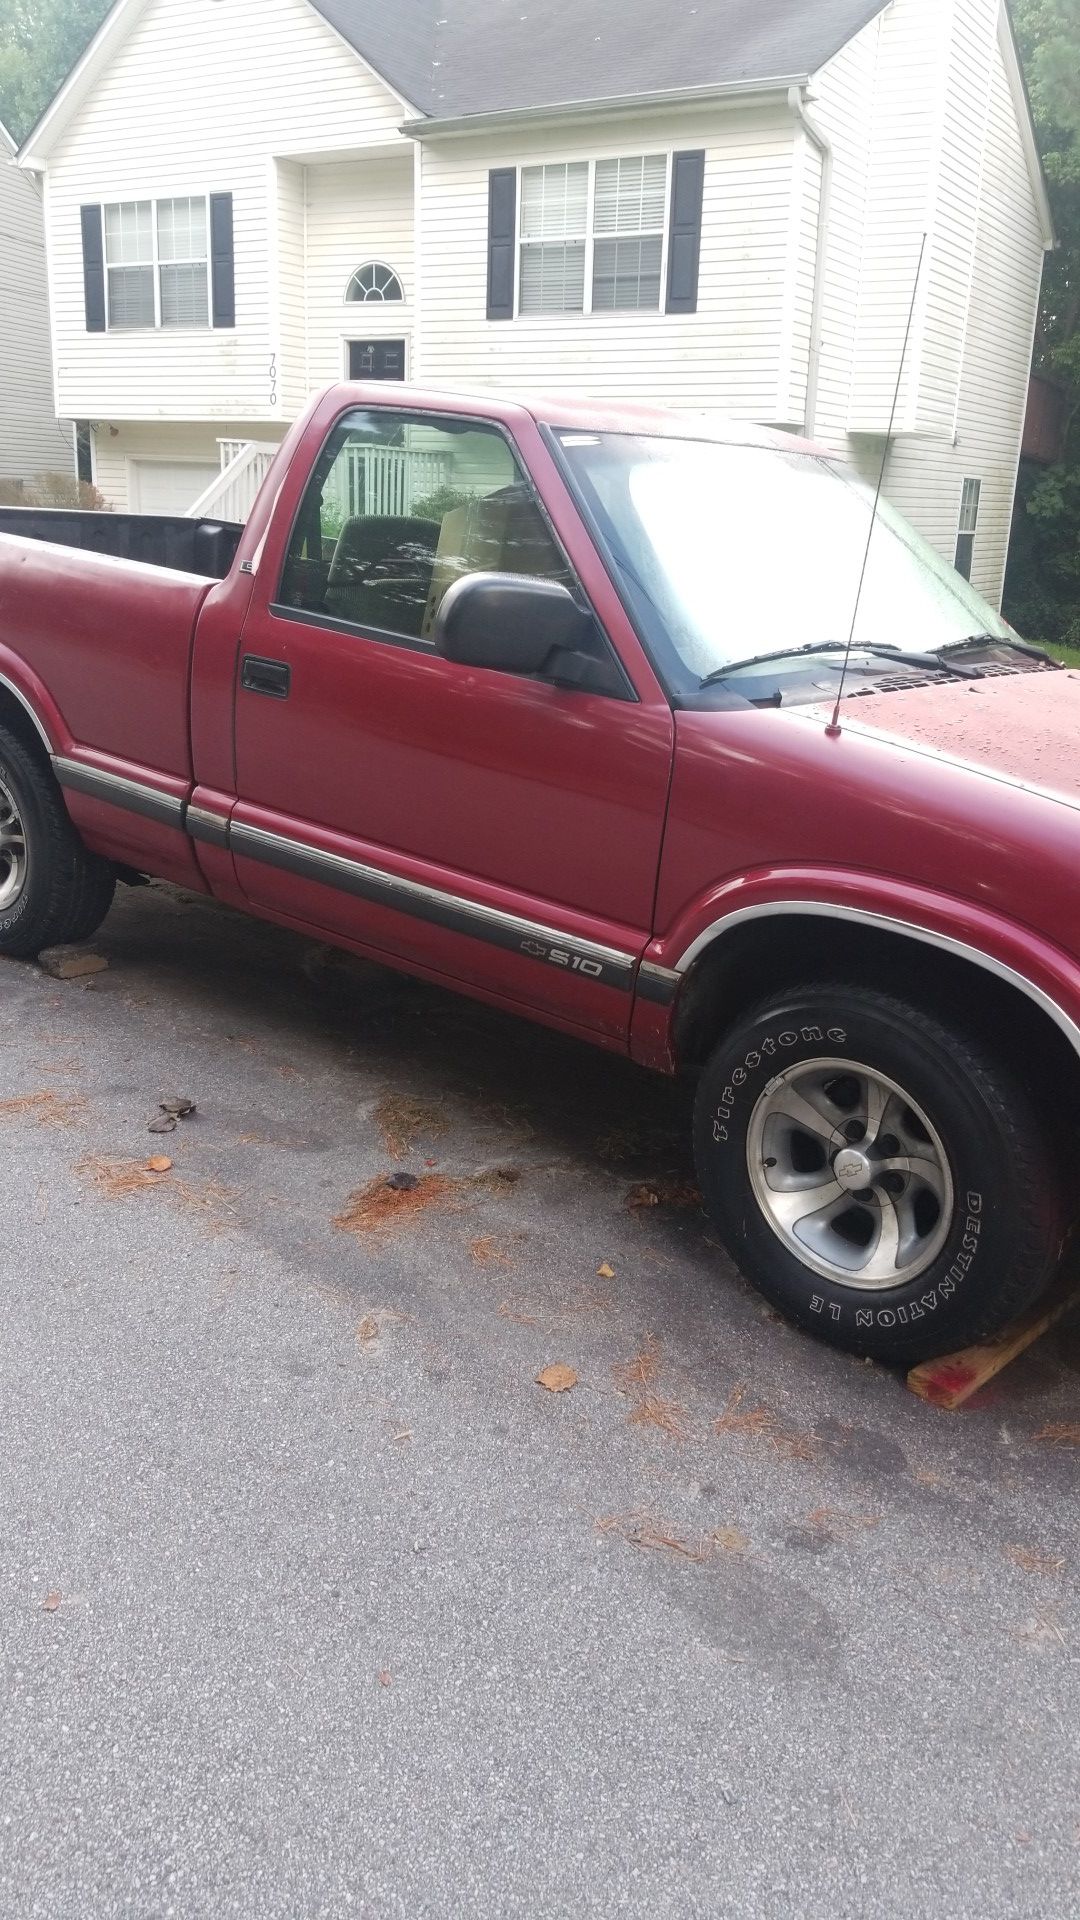 1996 s10 2.2 l 4cyl need transmission was five speed but set up for automatic 800$ firm clean title